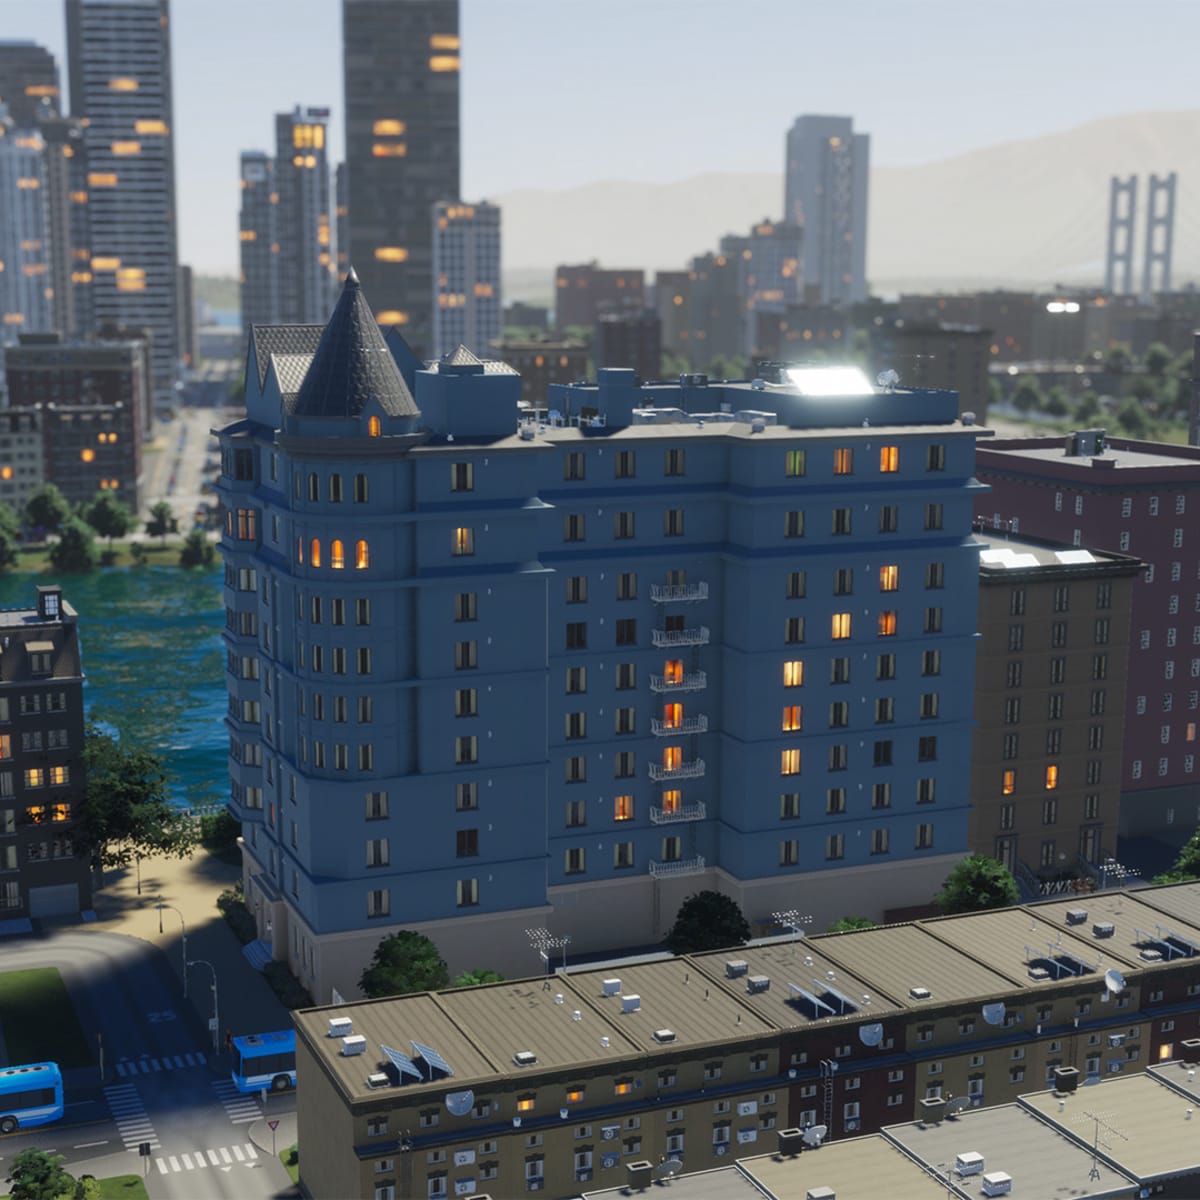 Cities Skylines 2 Mods Guide While Cities Skylines 2 is an excellent city-building  sim, a lively mod community can take things even…